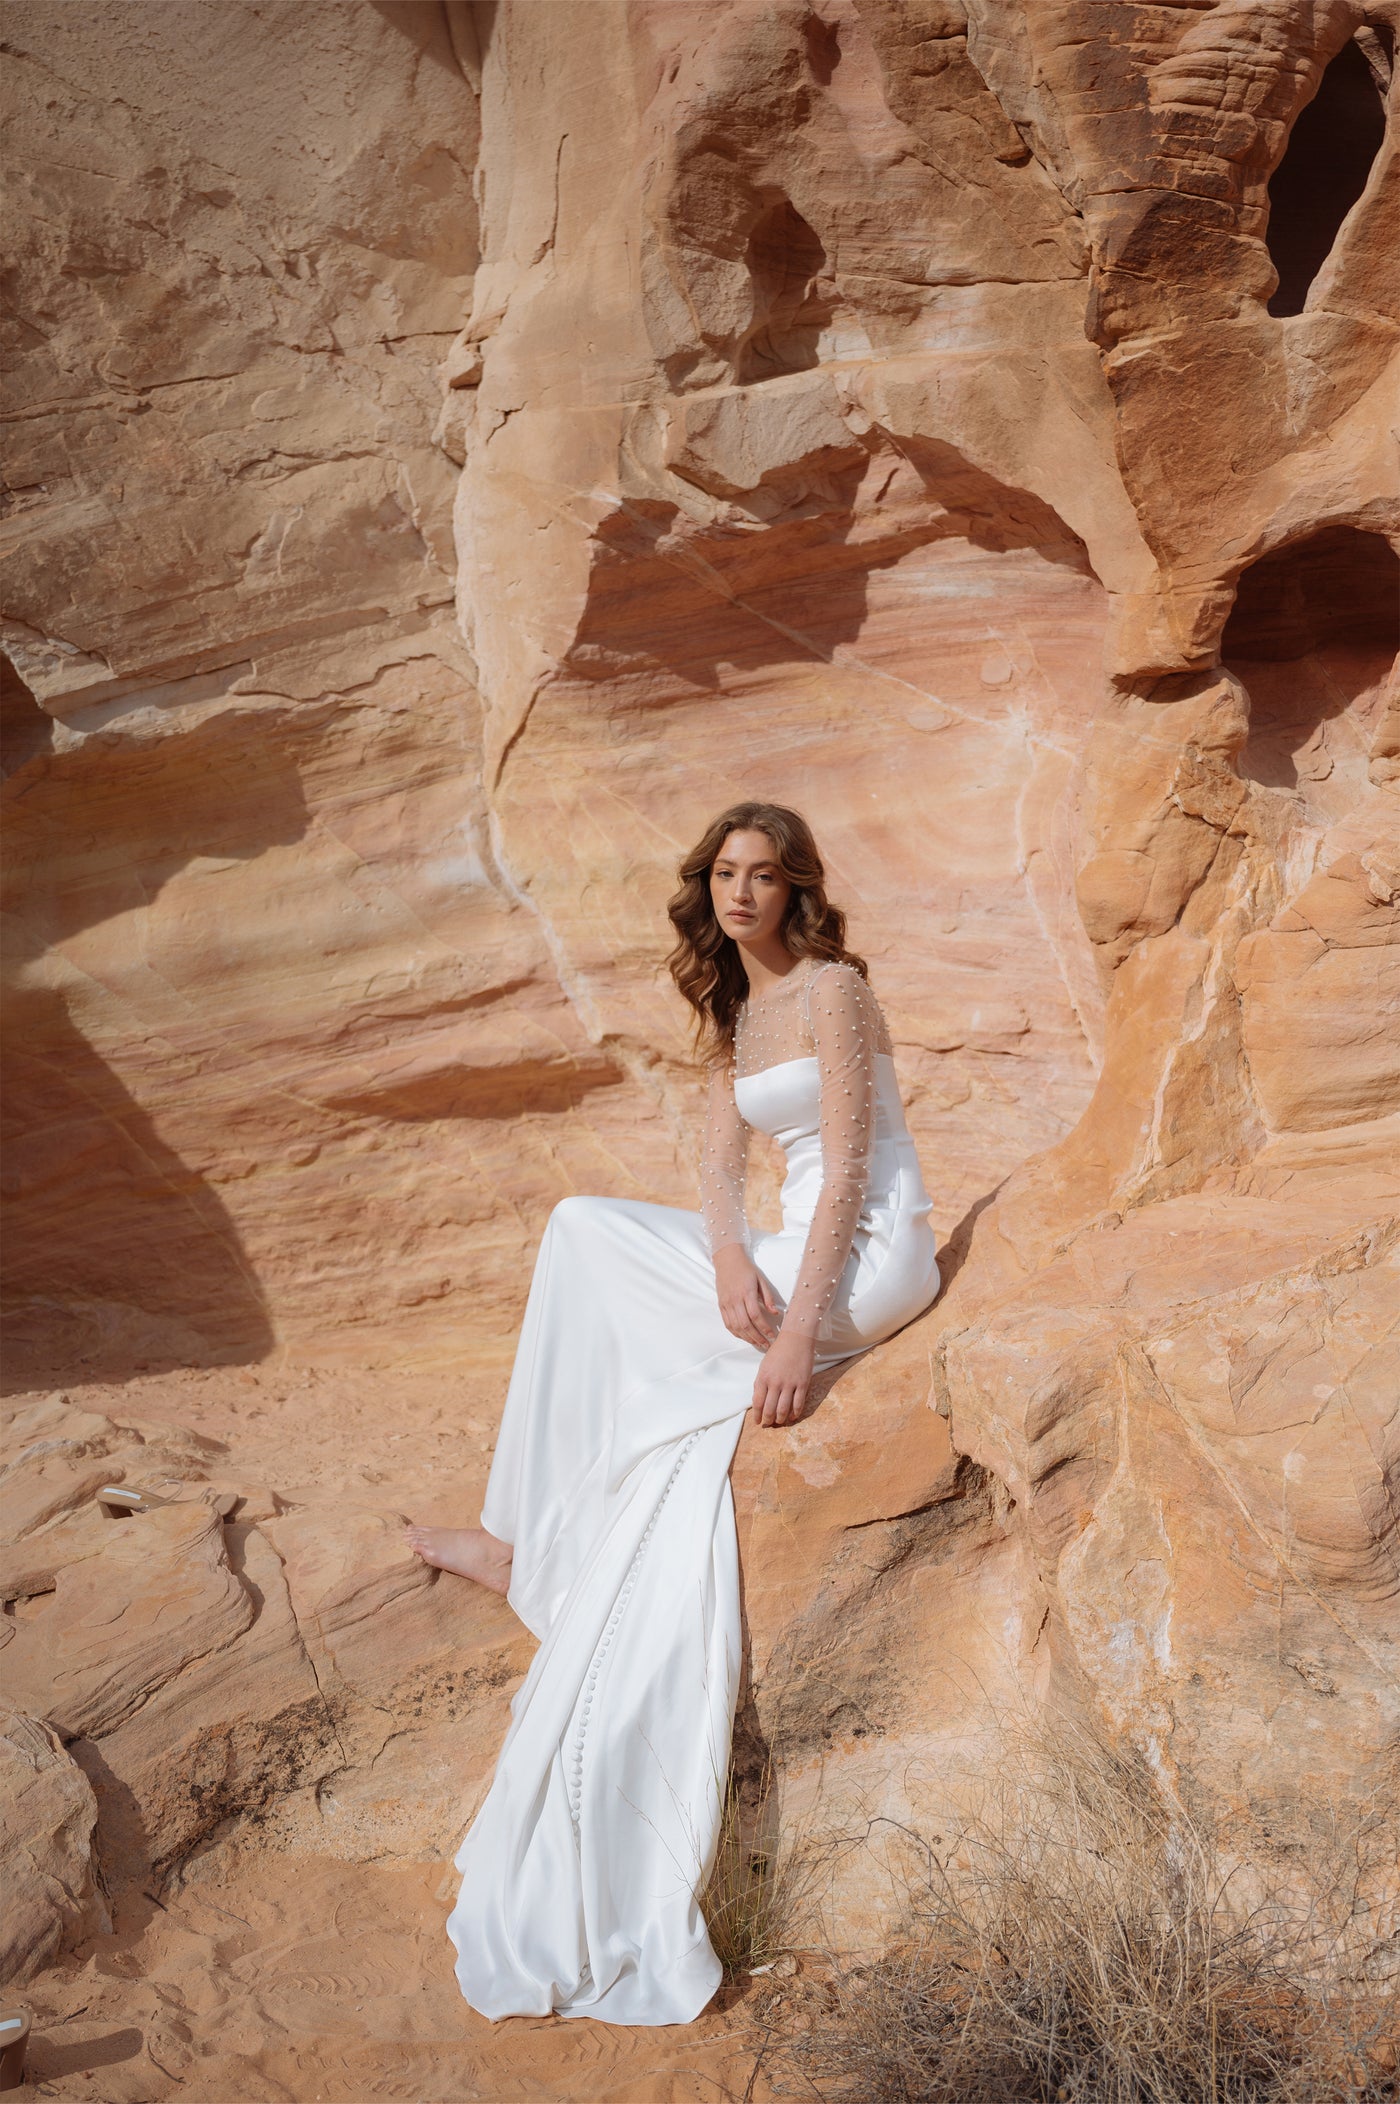 A woman in a white Jenny Yoo Wedding Dress adorned with pearls posing against a sandstone rock formation from Bergamot Bridal.